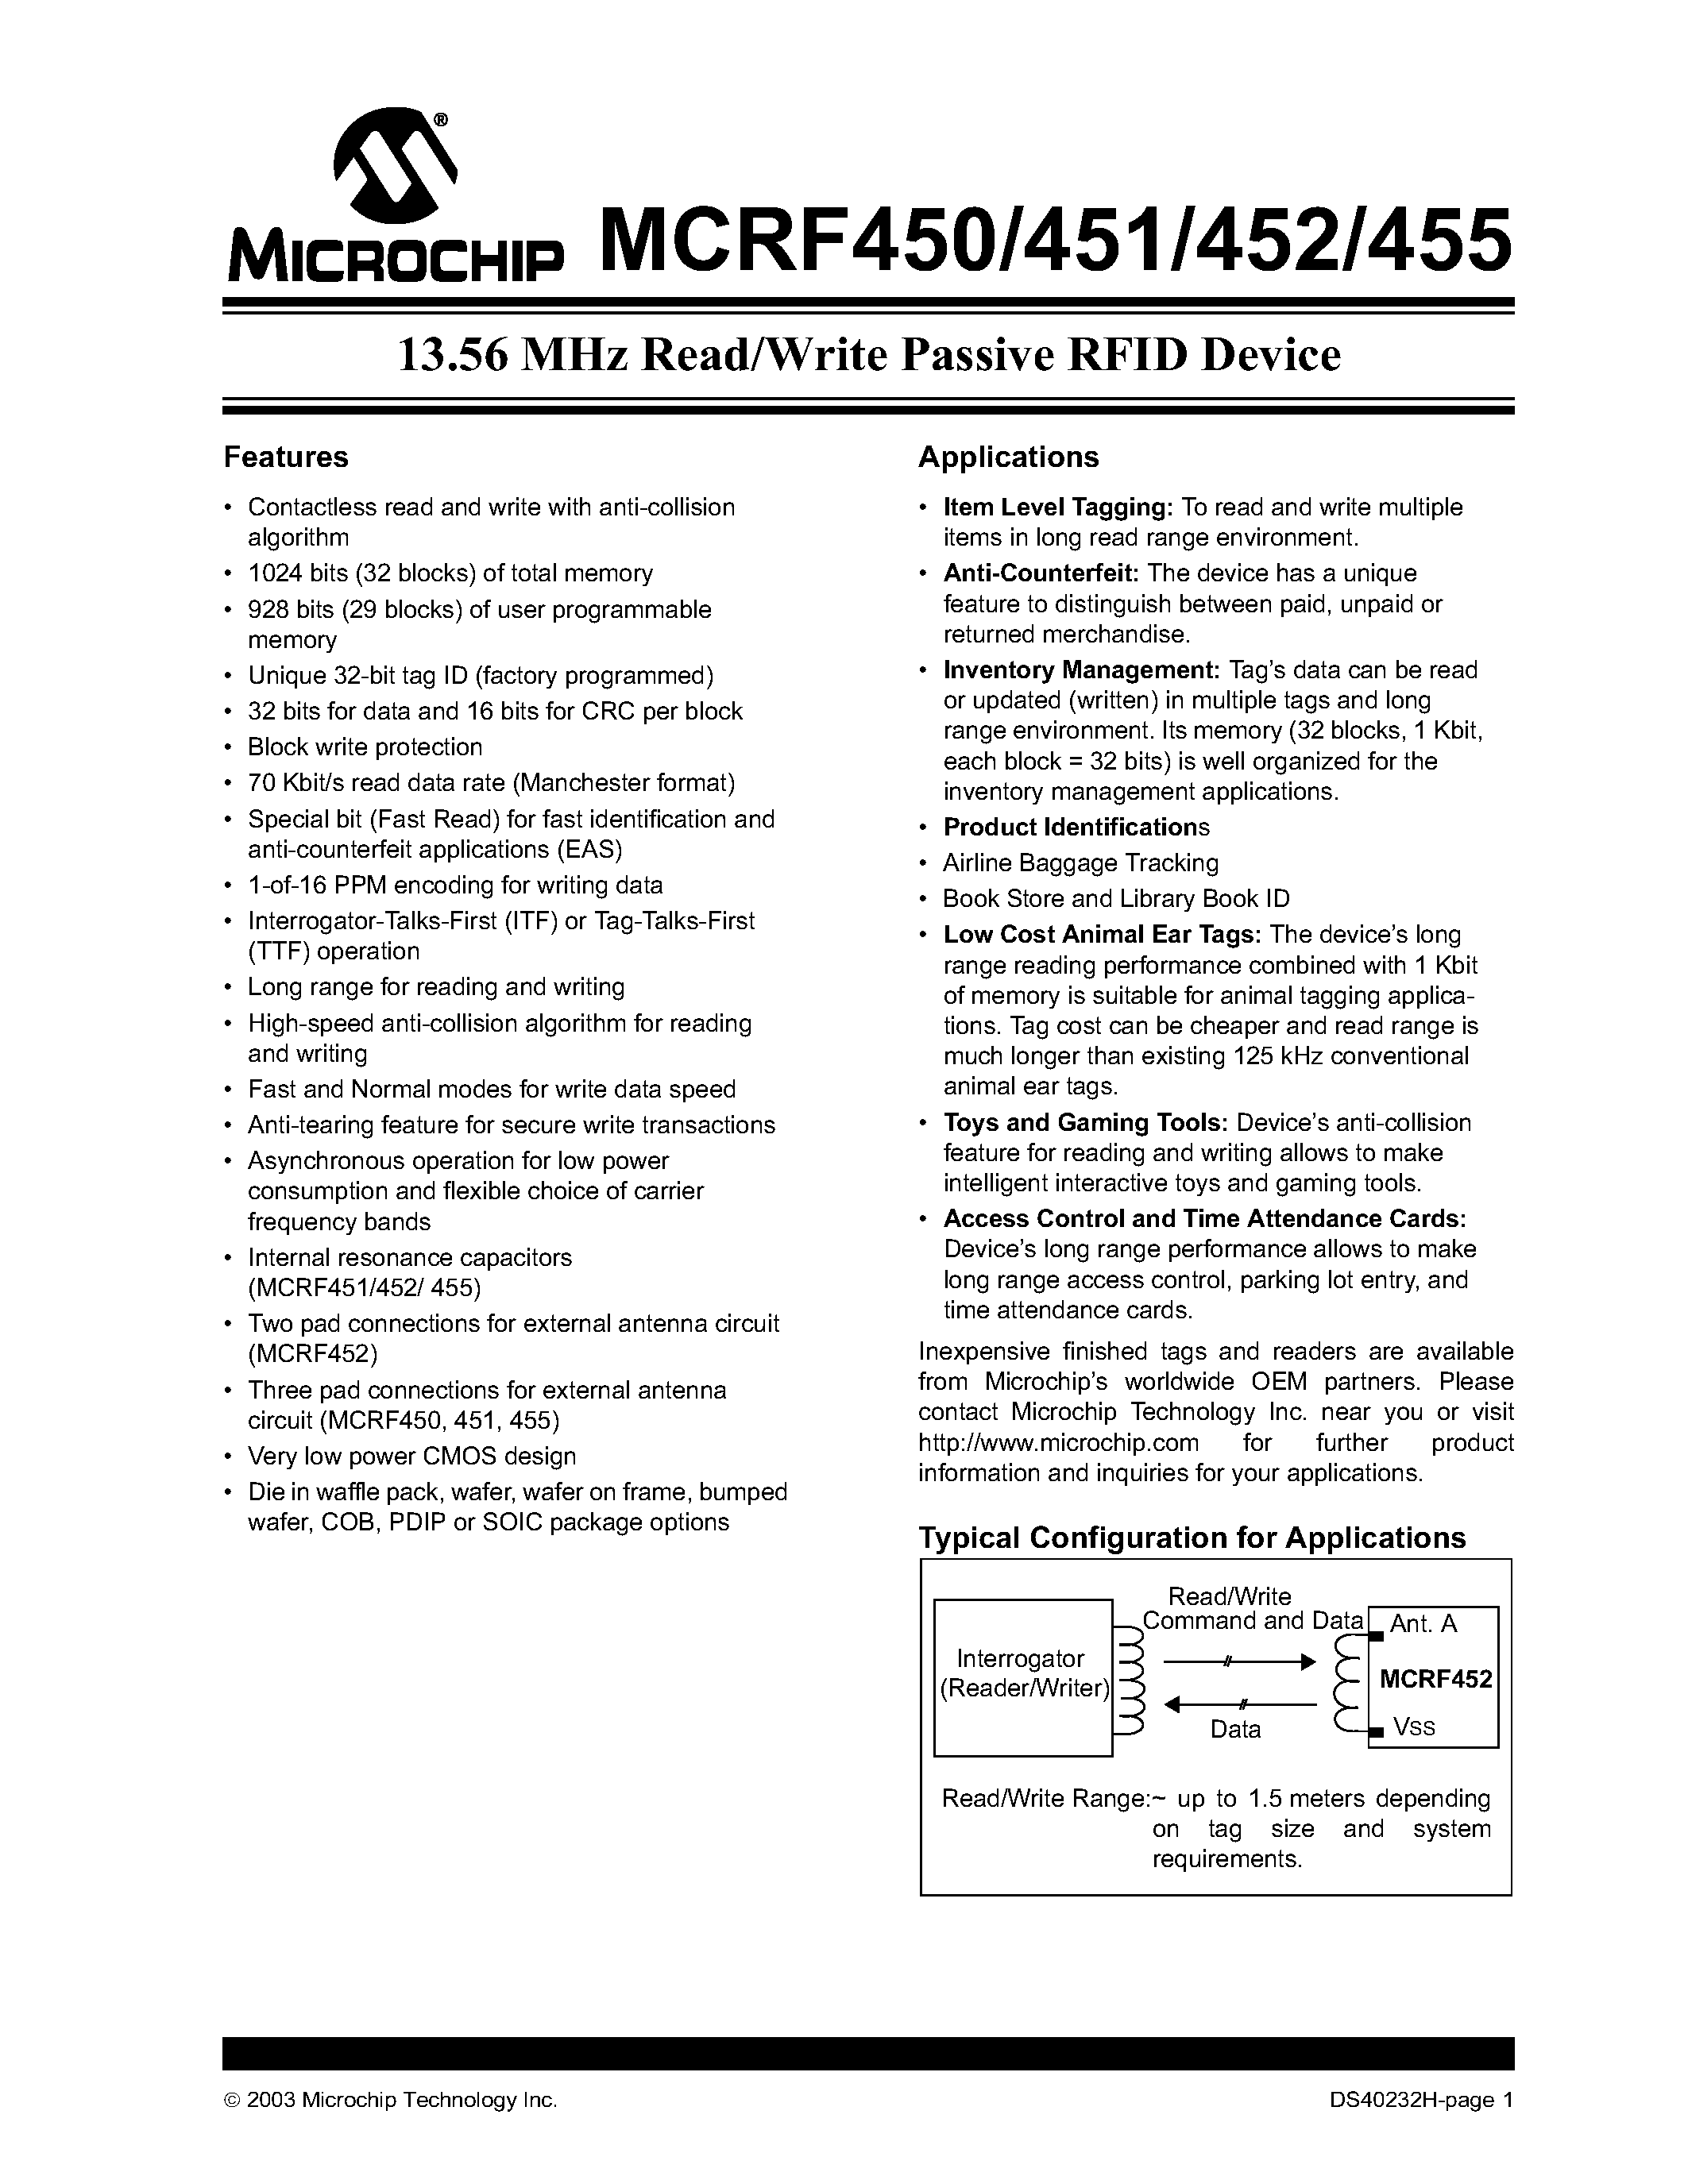 Datasheet MCRF451 - 13.56 MHz Read/Write Passive RFID Device page 1